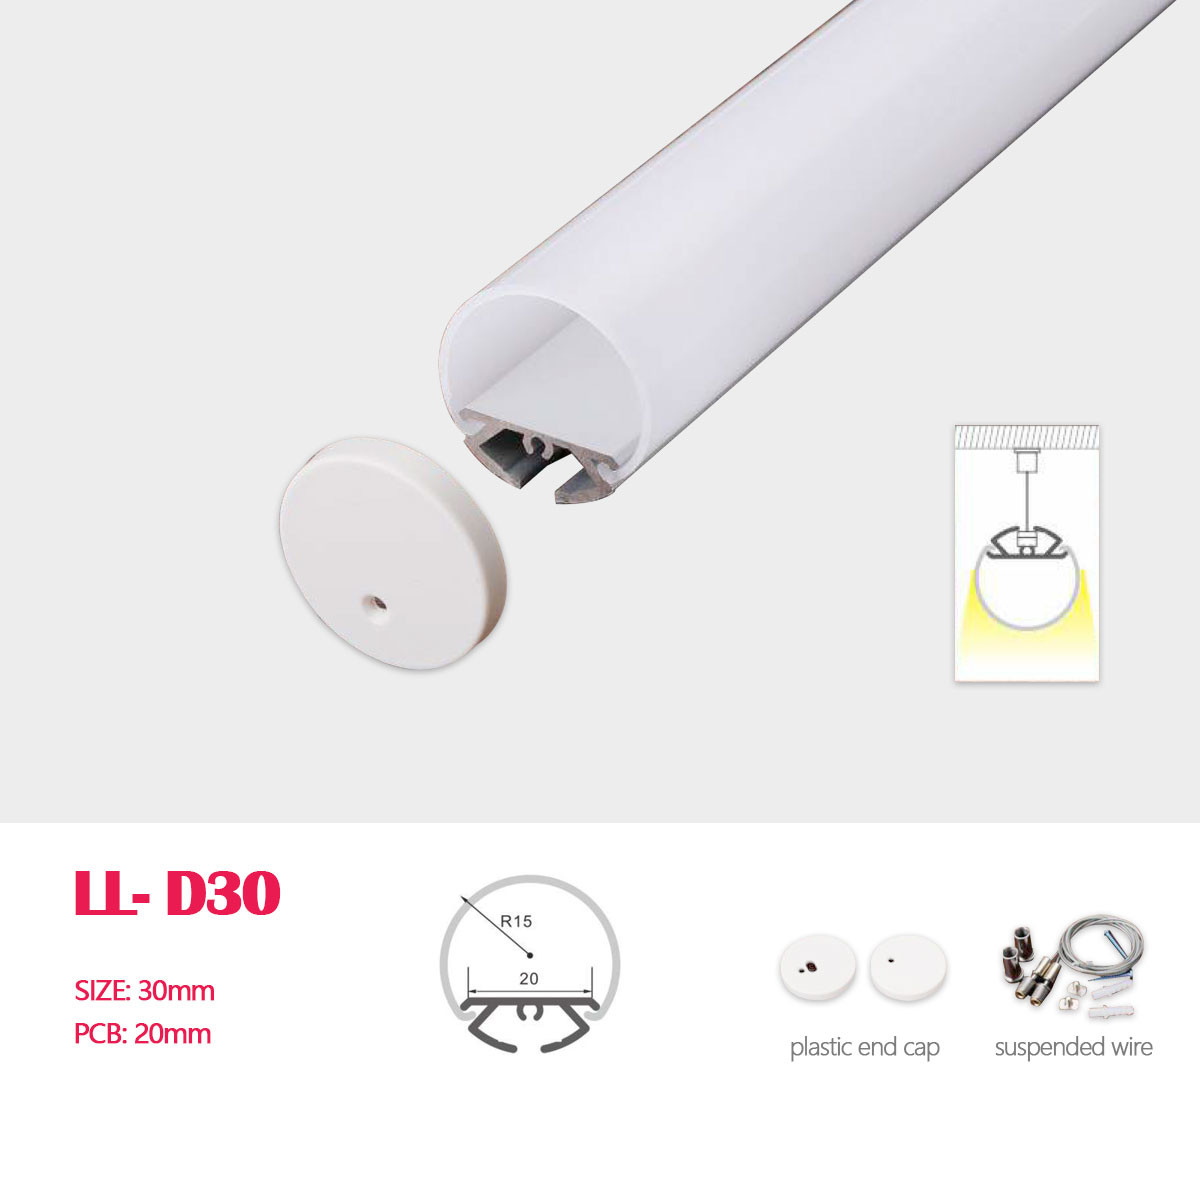 1M (3.28FT) Dia. 30mm LED Aluminum Profile with Round Cover,Suspension wires and Plastic Ends for Hanging LED Strip Lighting Application